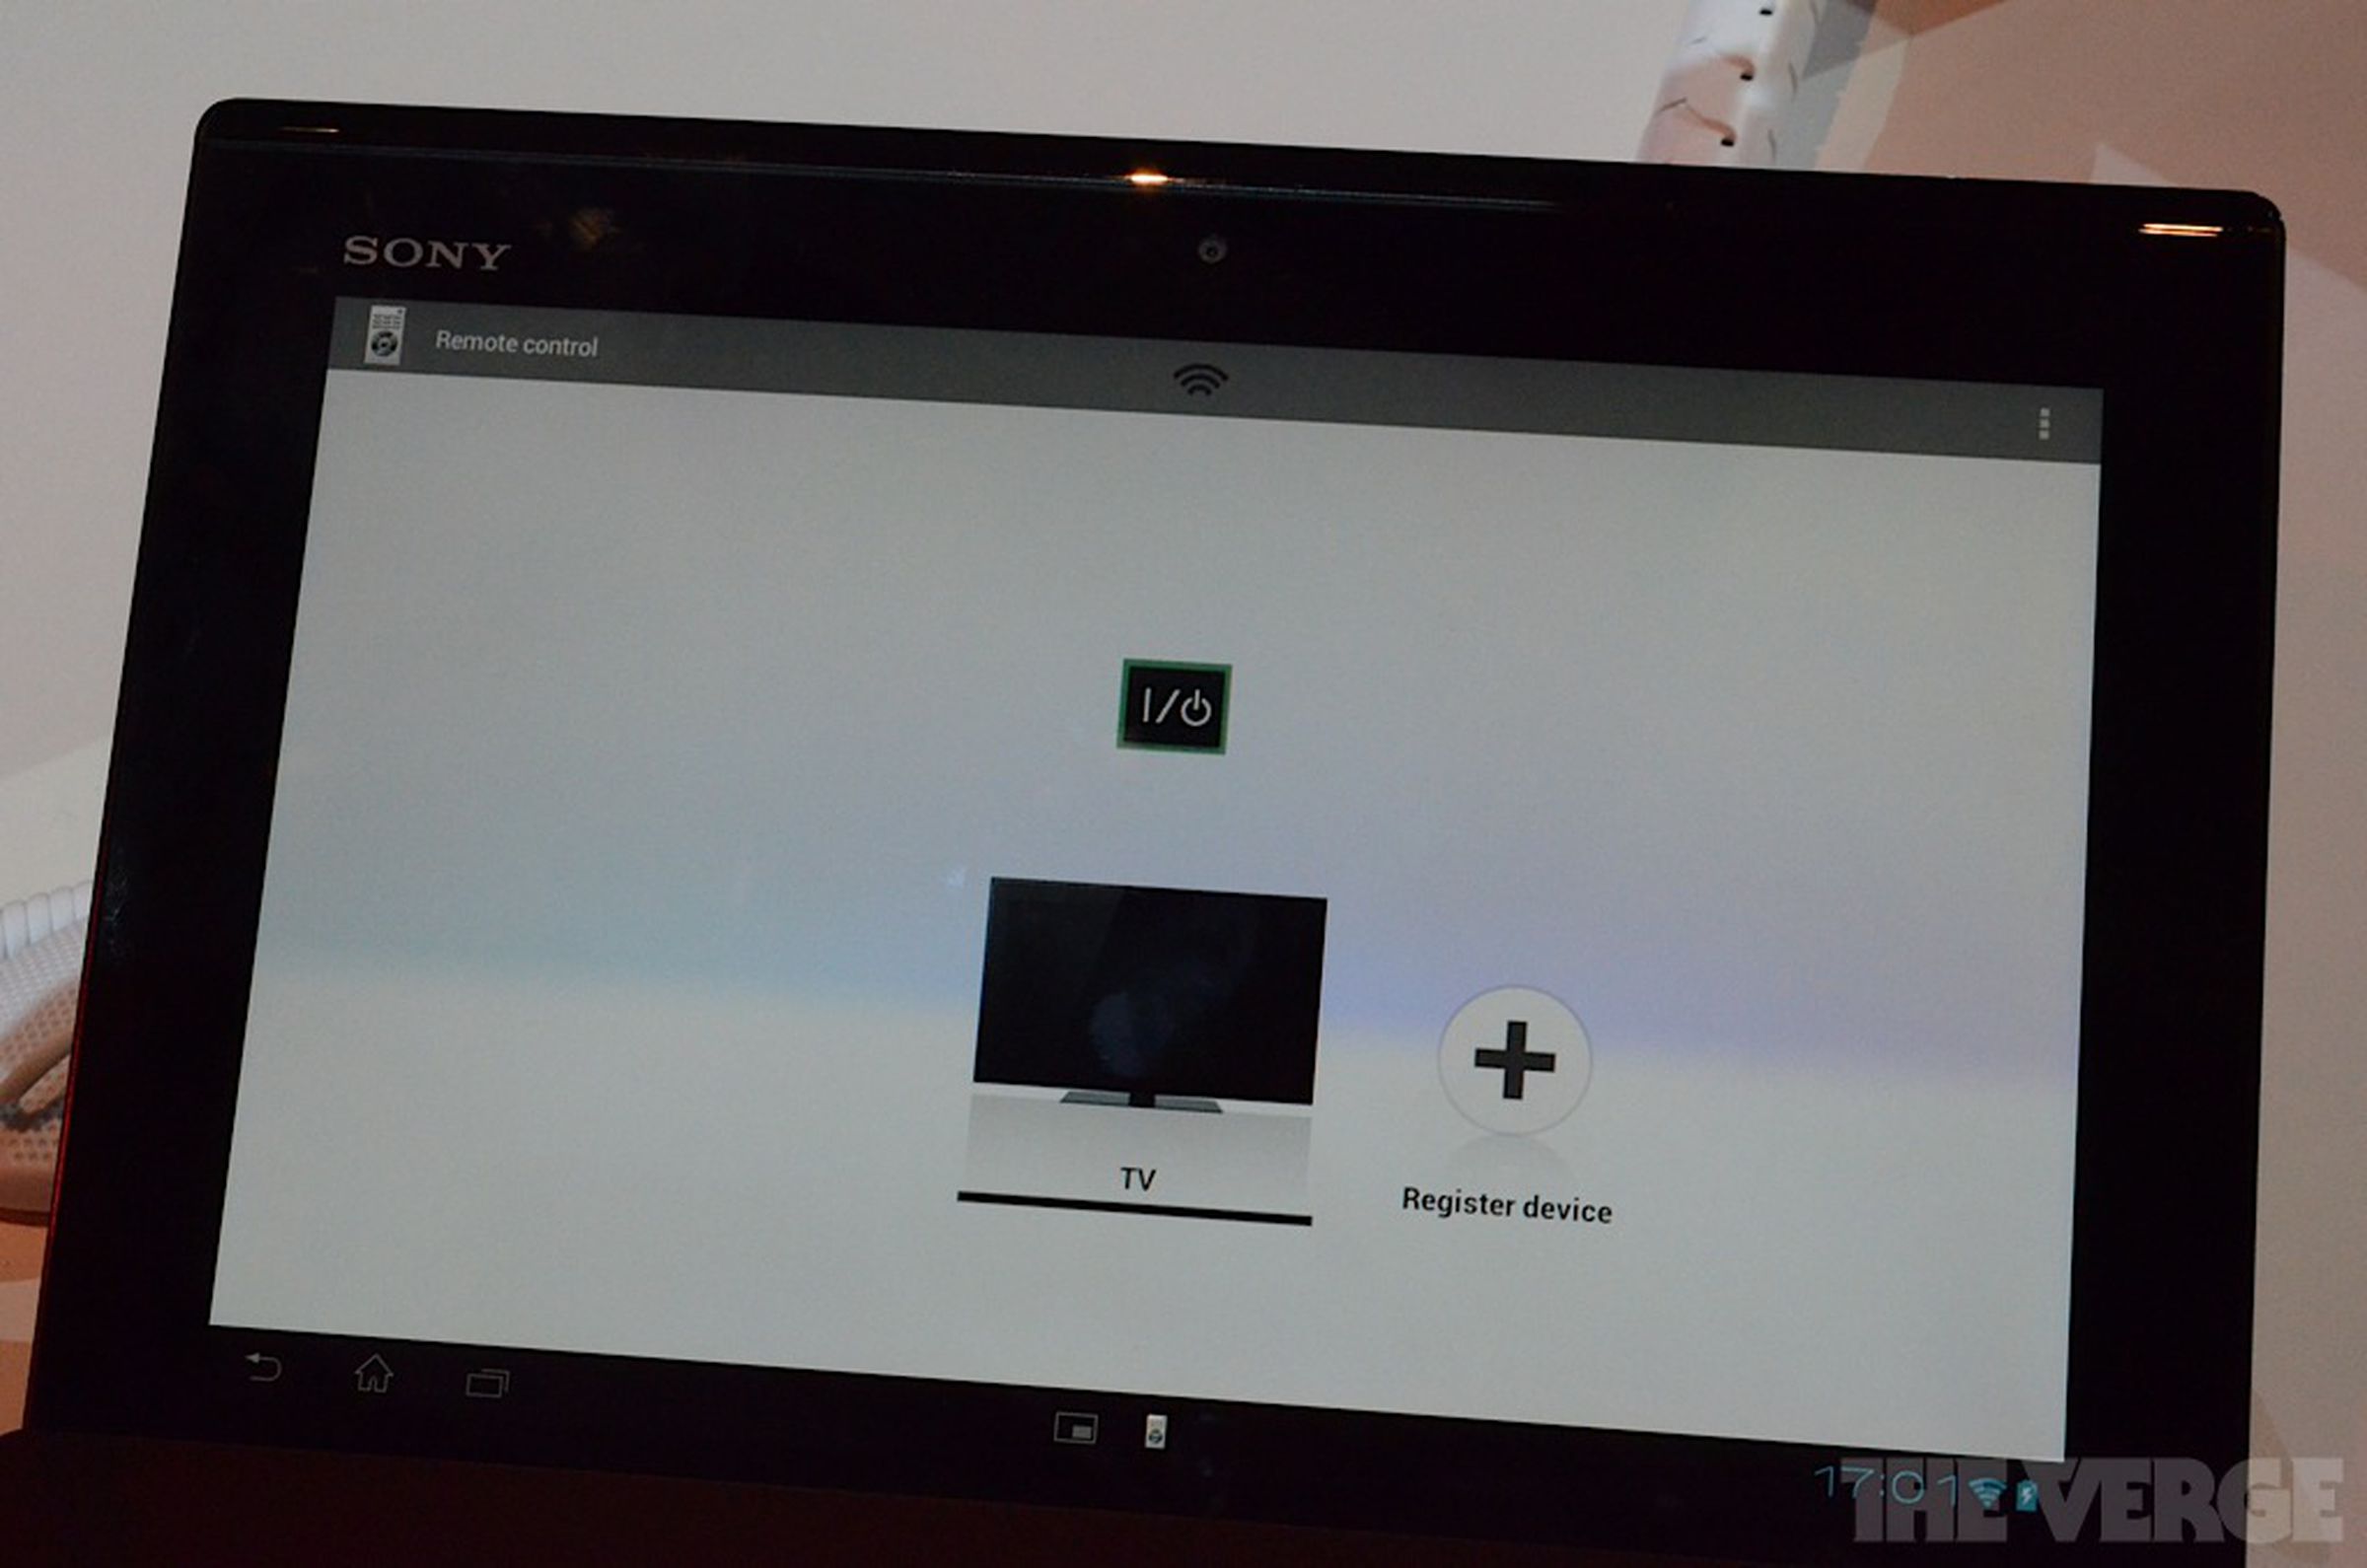 Sony Xperia Tablet S hands-on pictures from IFA 2012